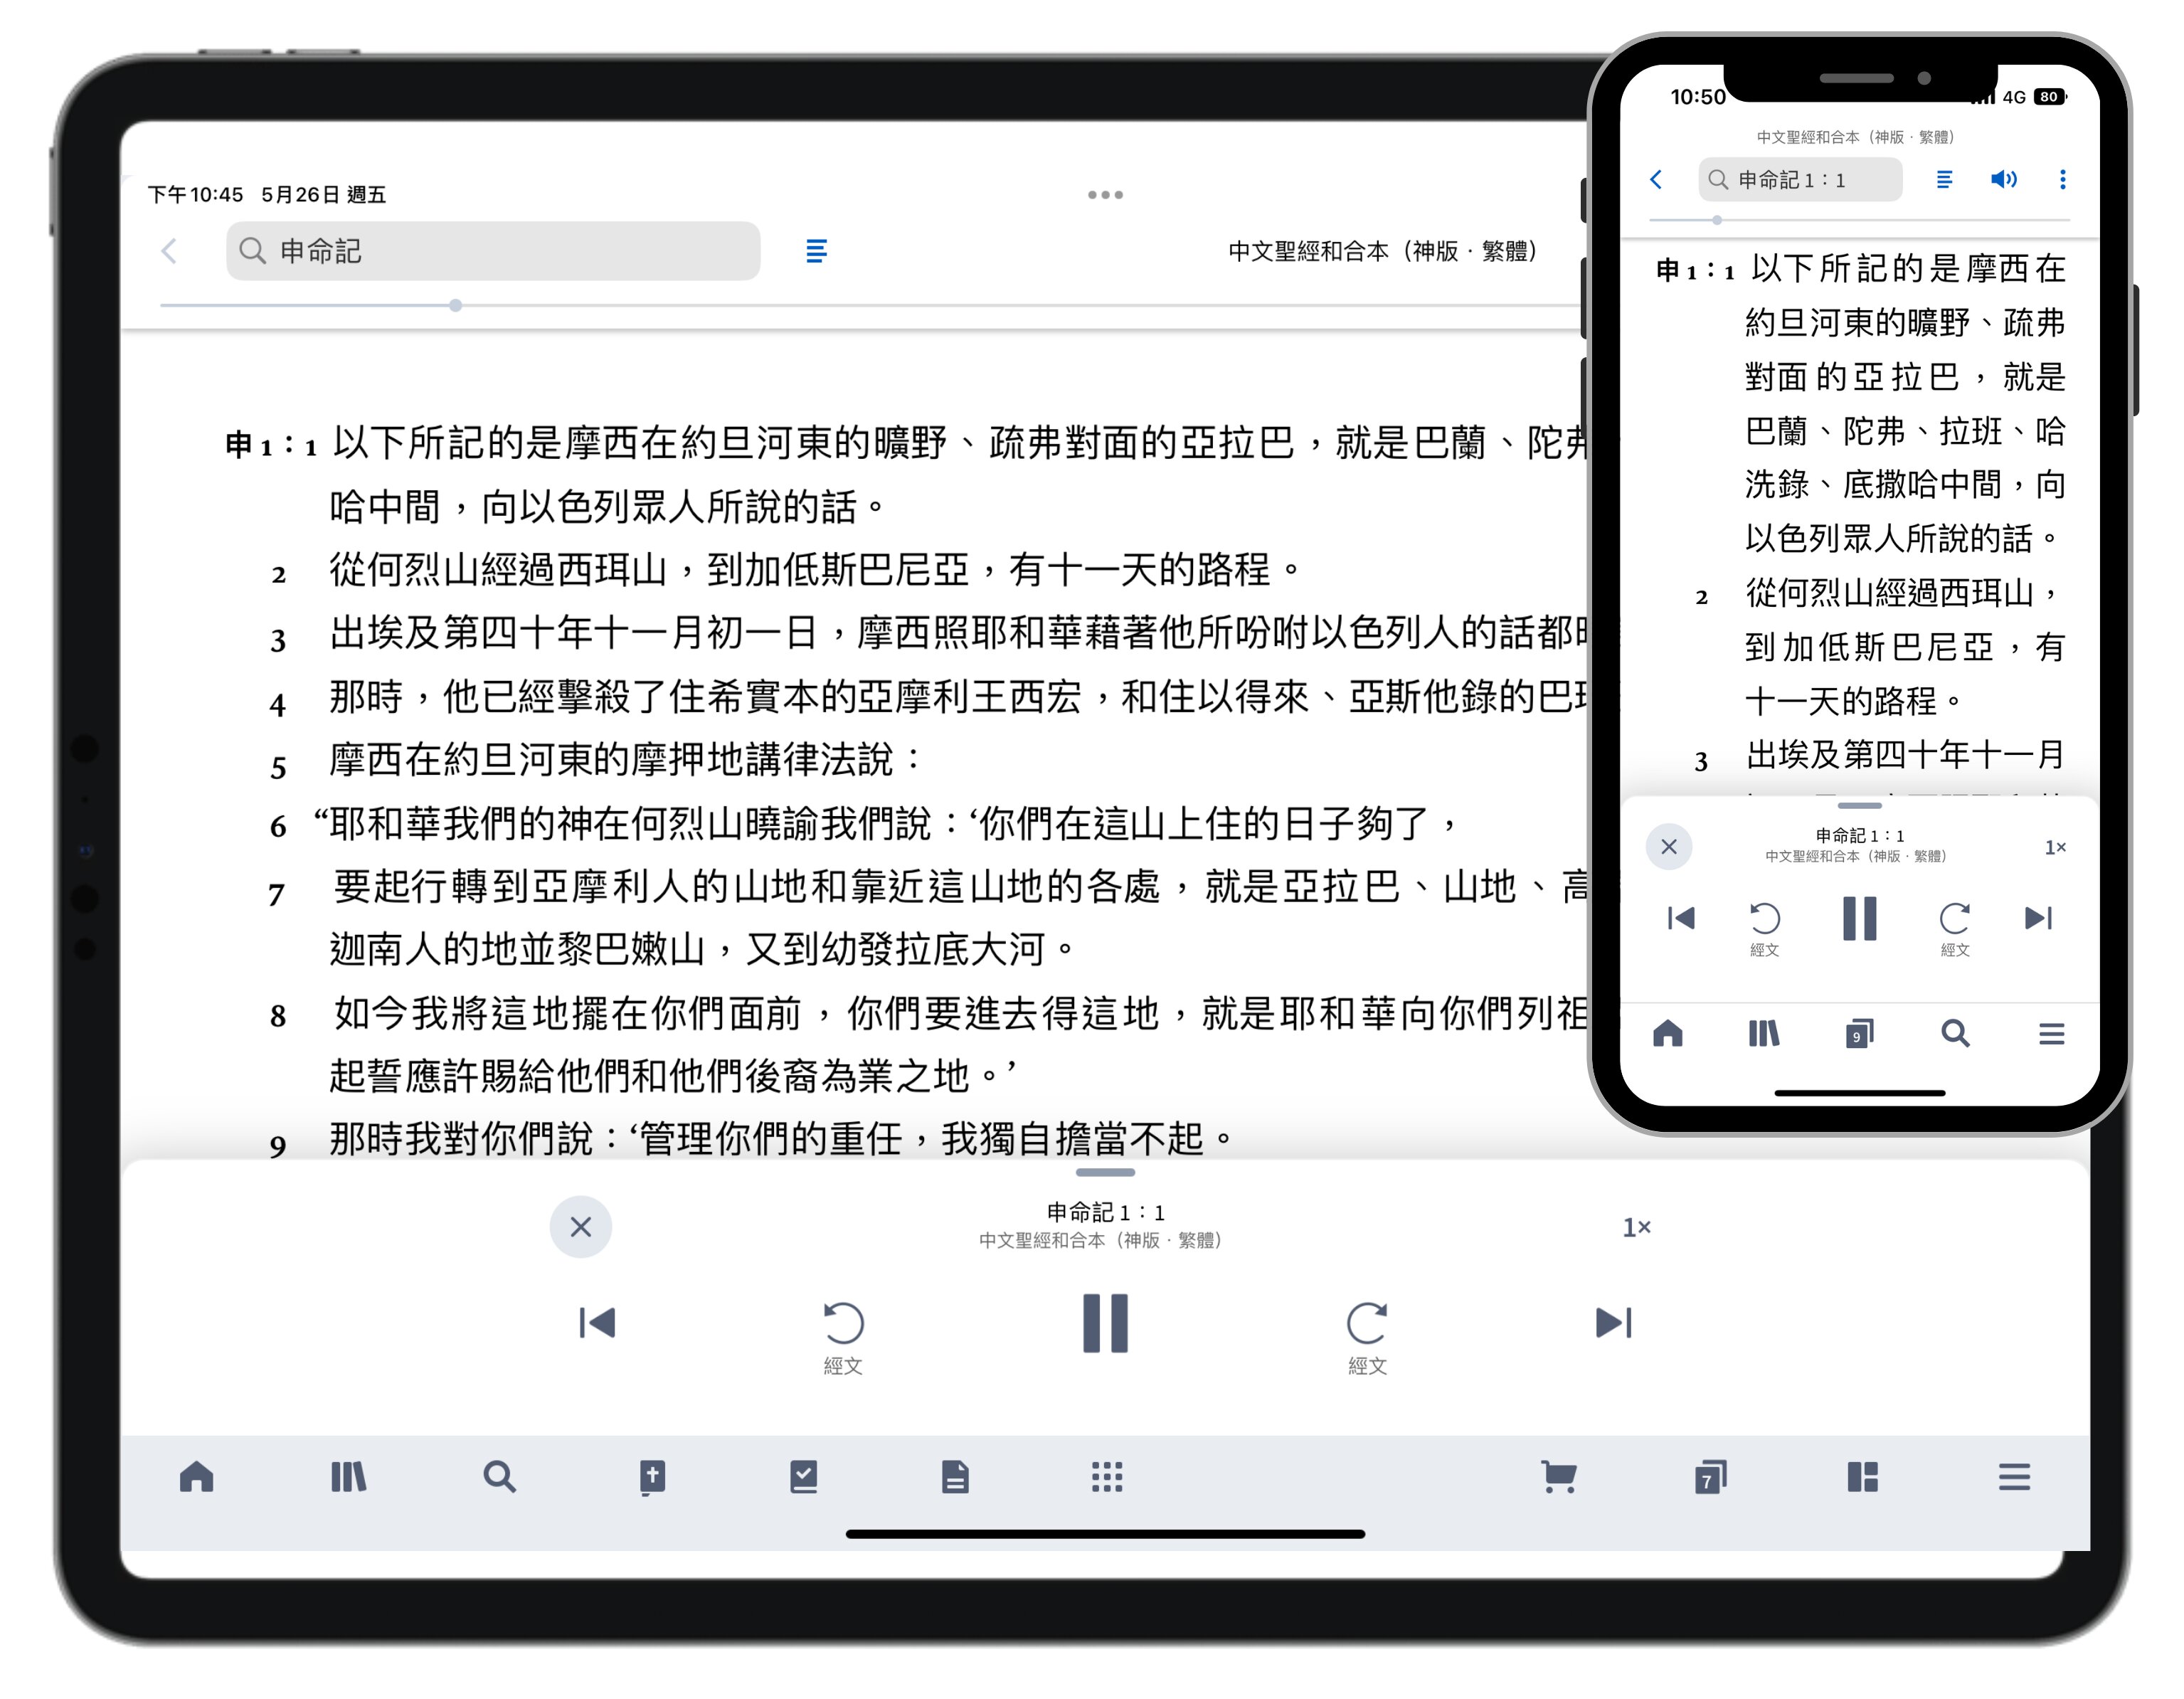 A picture of an iPad with a resource open with the Read Aloud feature working. There is a big pause button toward the bottom of the screen, indicating that the audio is playing.